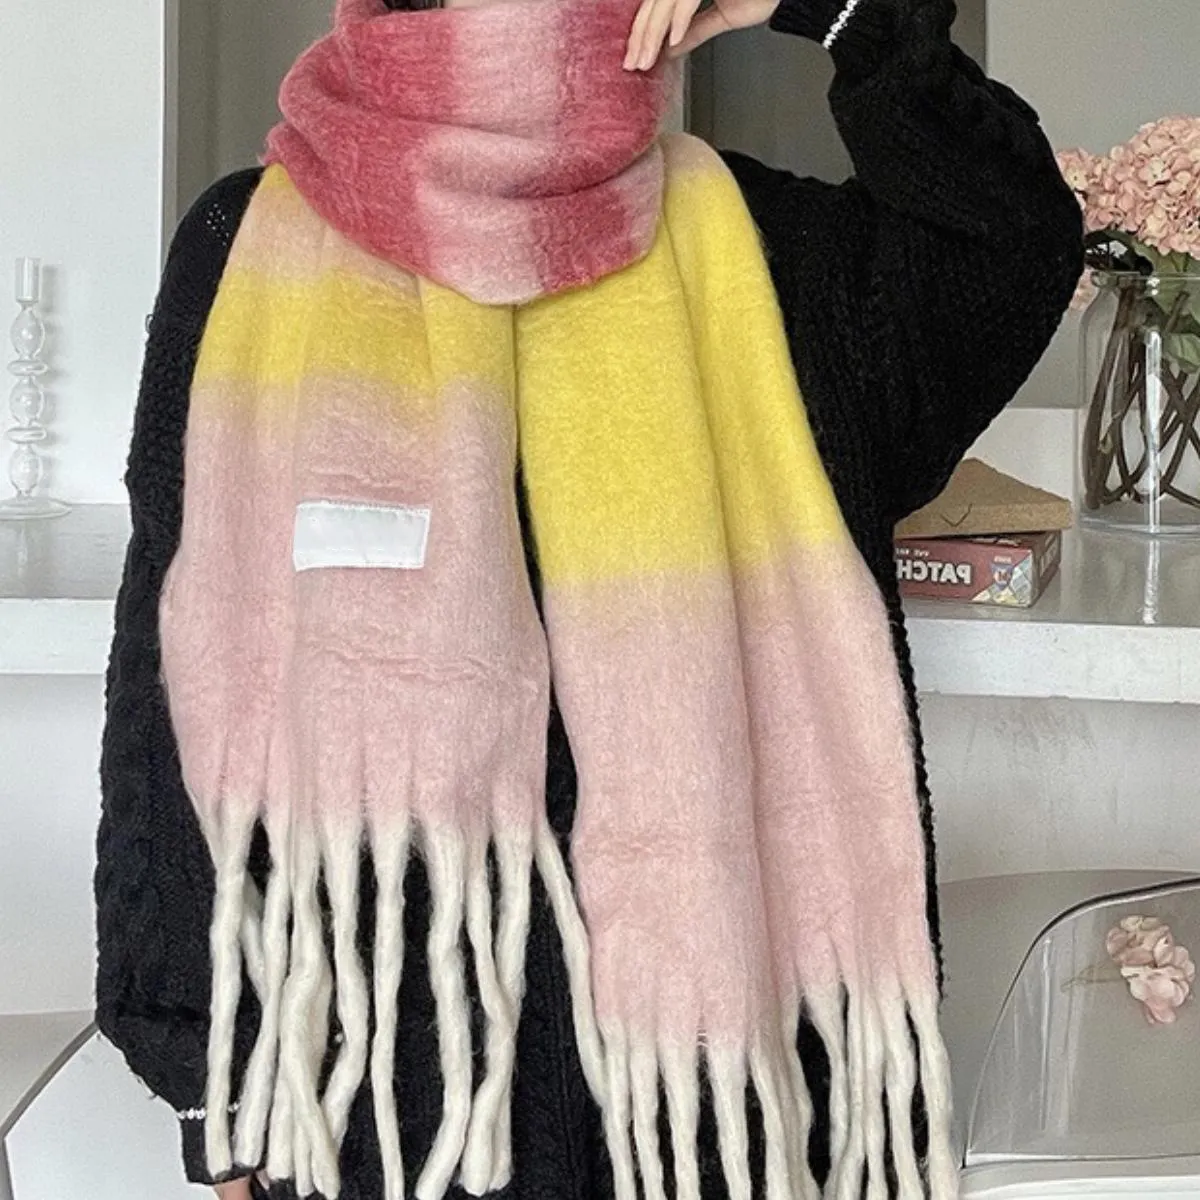 Scarf designers scarf pashmina designer scarf luxe womens mens plaid cape long wraps warm shawl winter hot clothing collocation scarfs